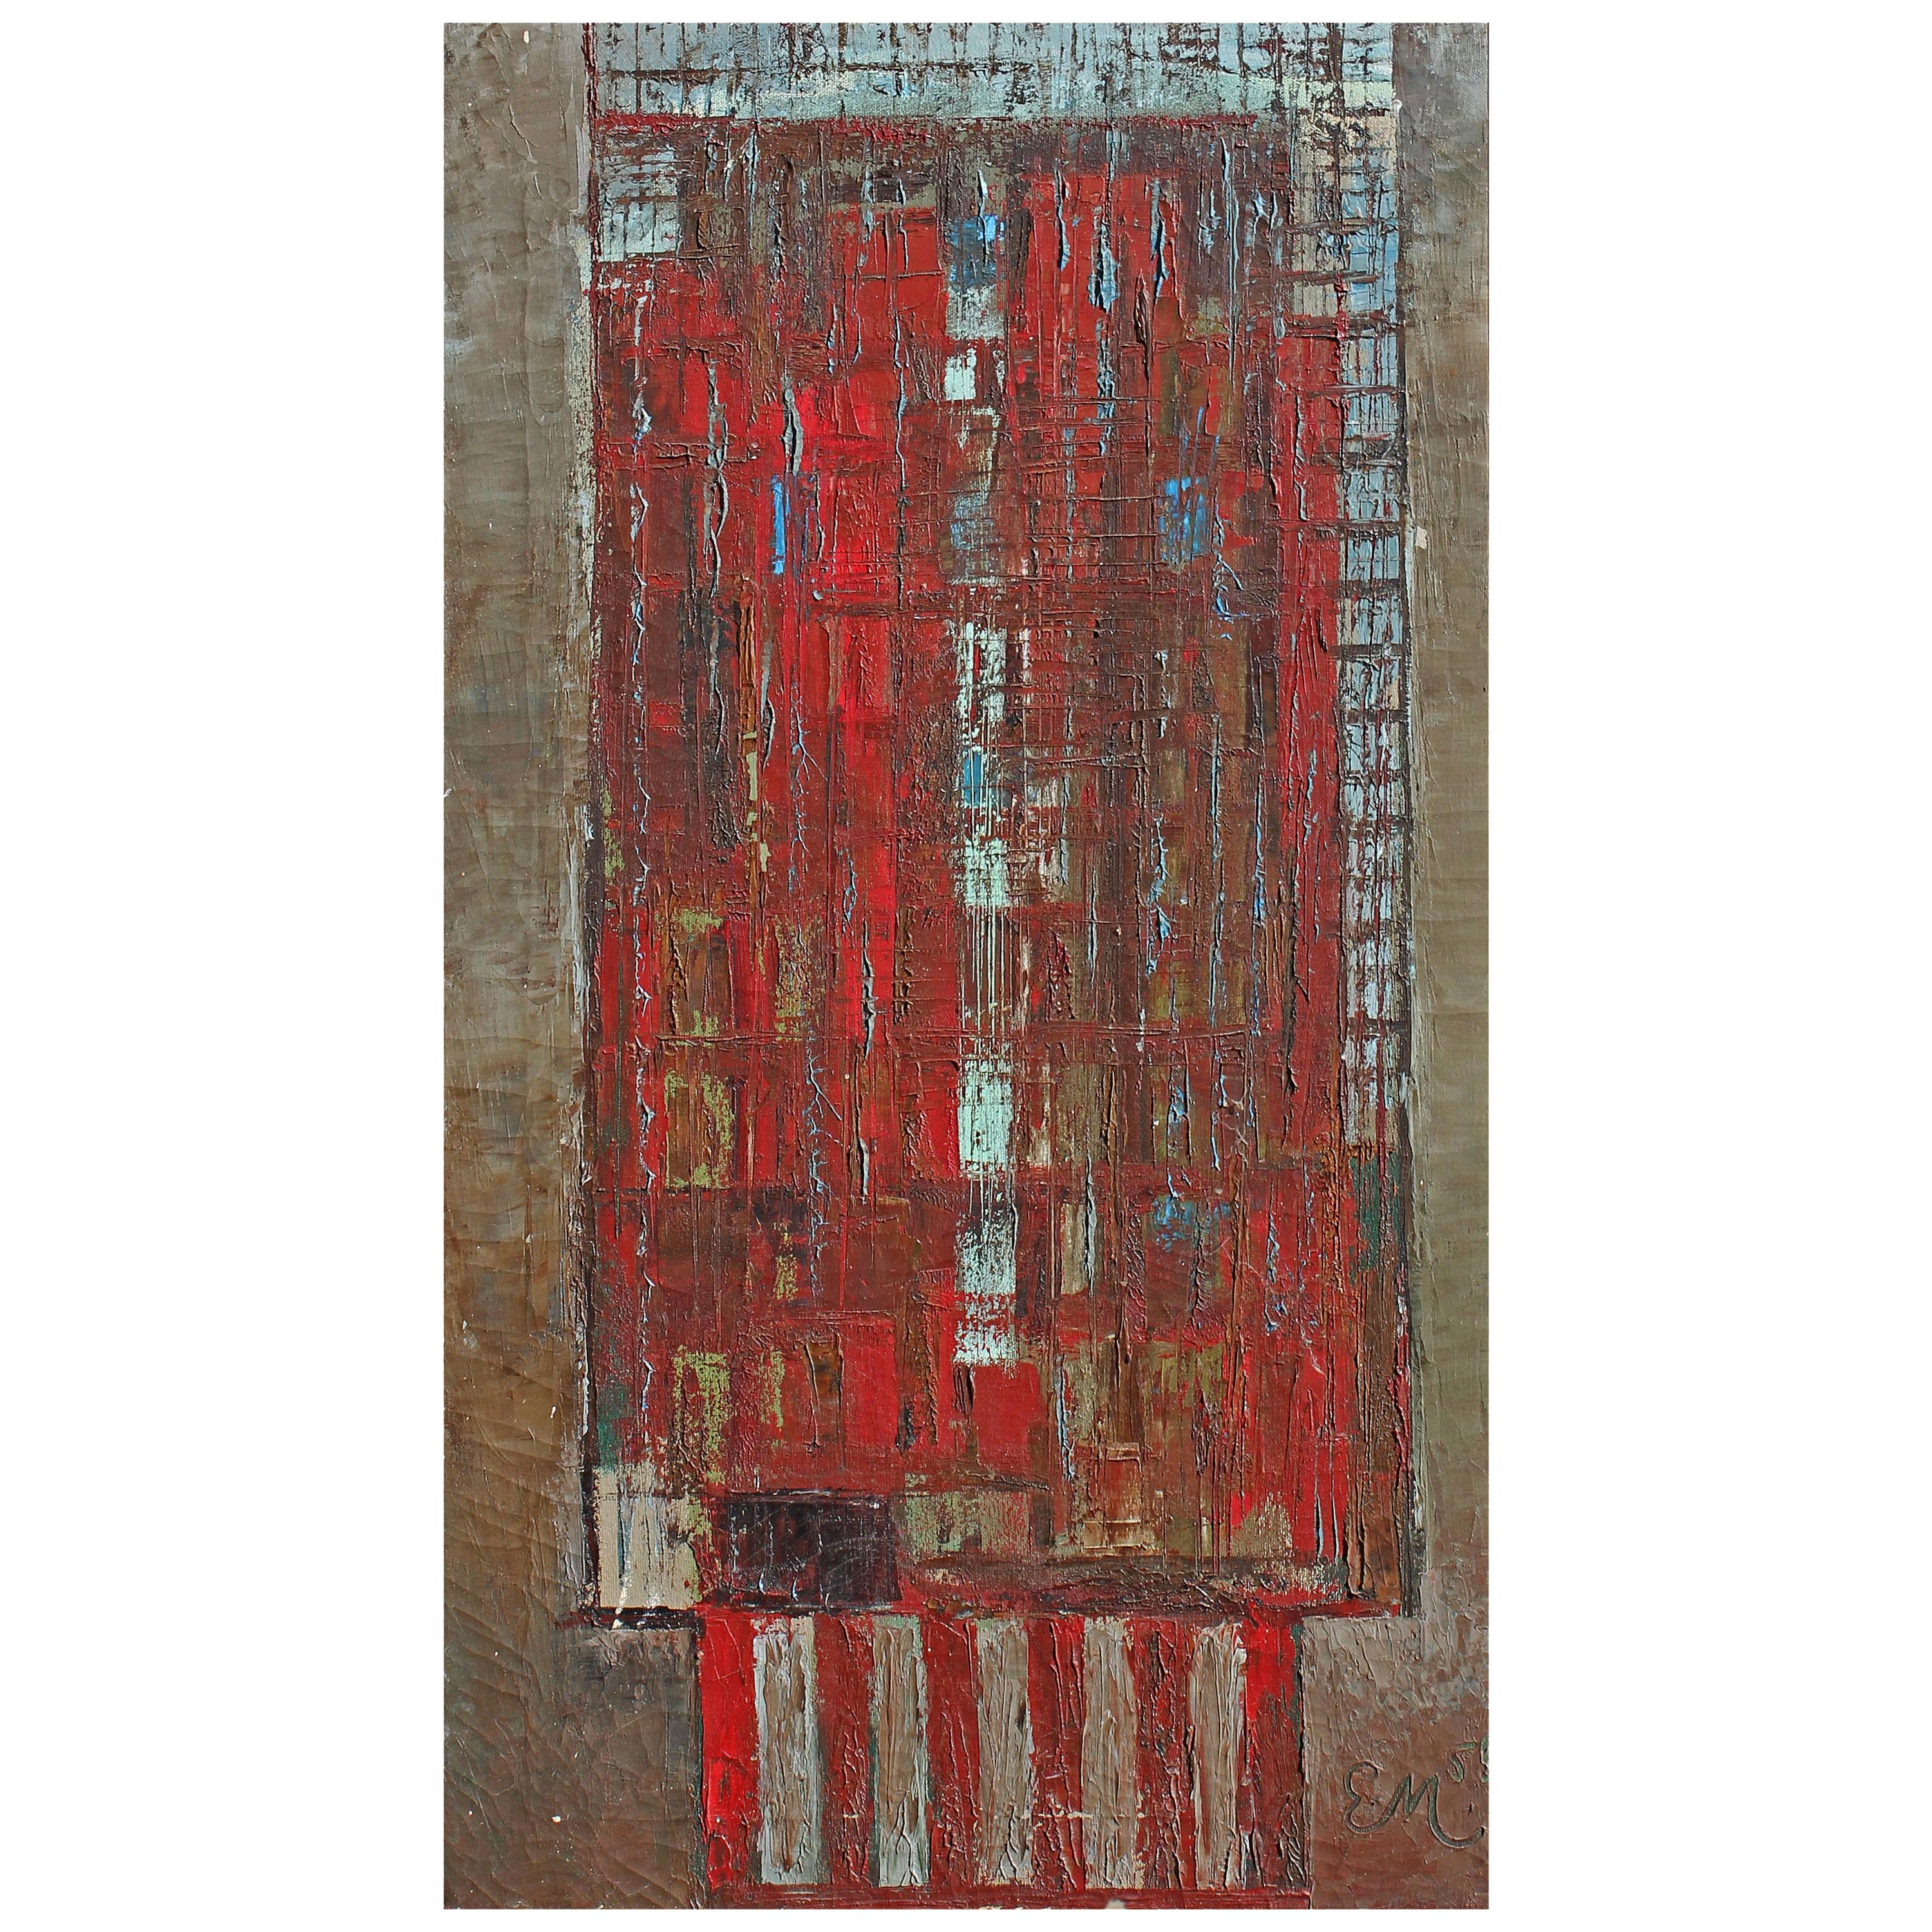 American abstract Bauhaus style high rise building. Oil on canvas, signed 